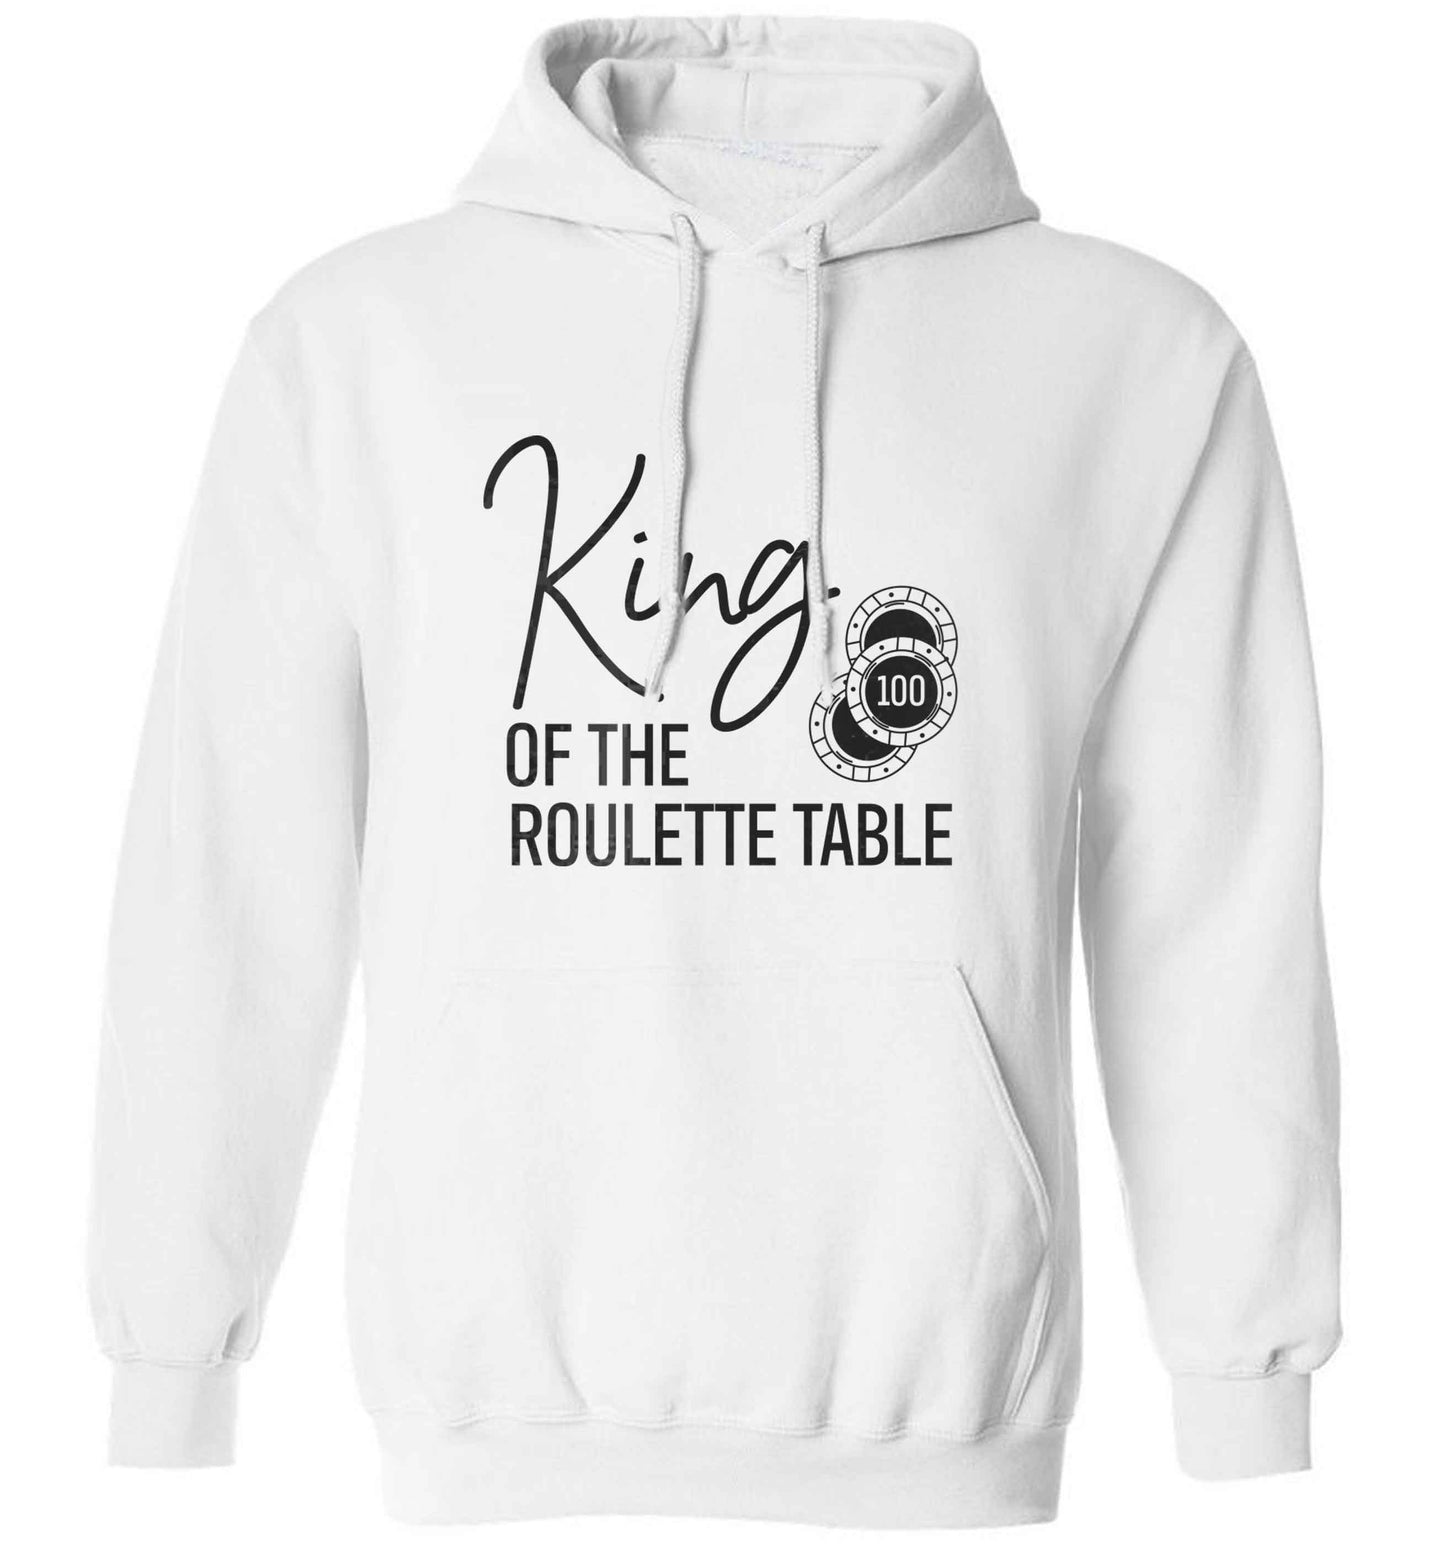 King of the roulette table adults unisex white hoodie 2XL